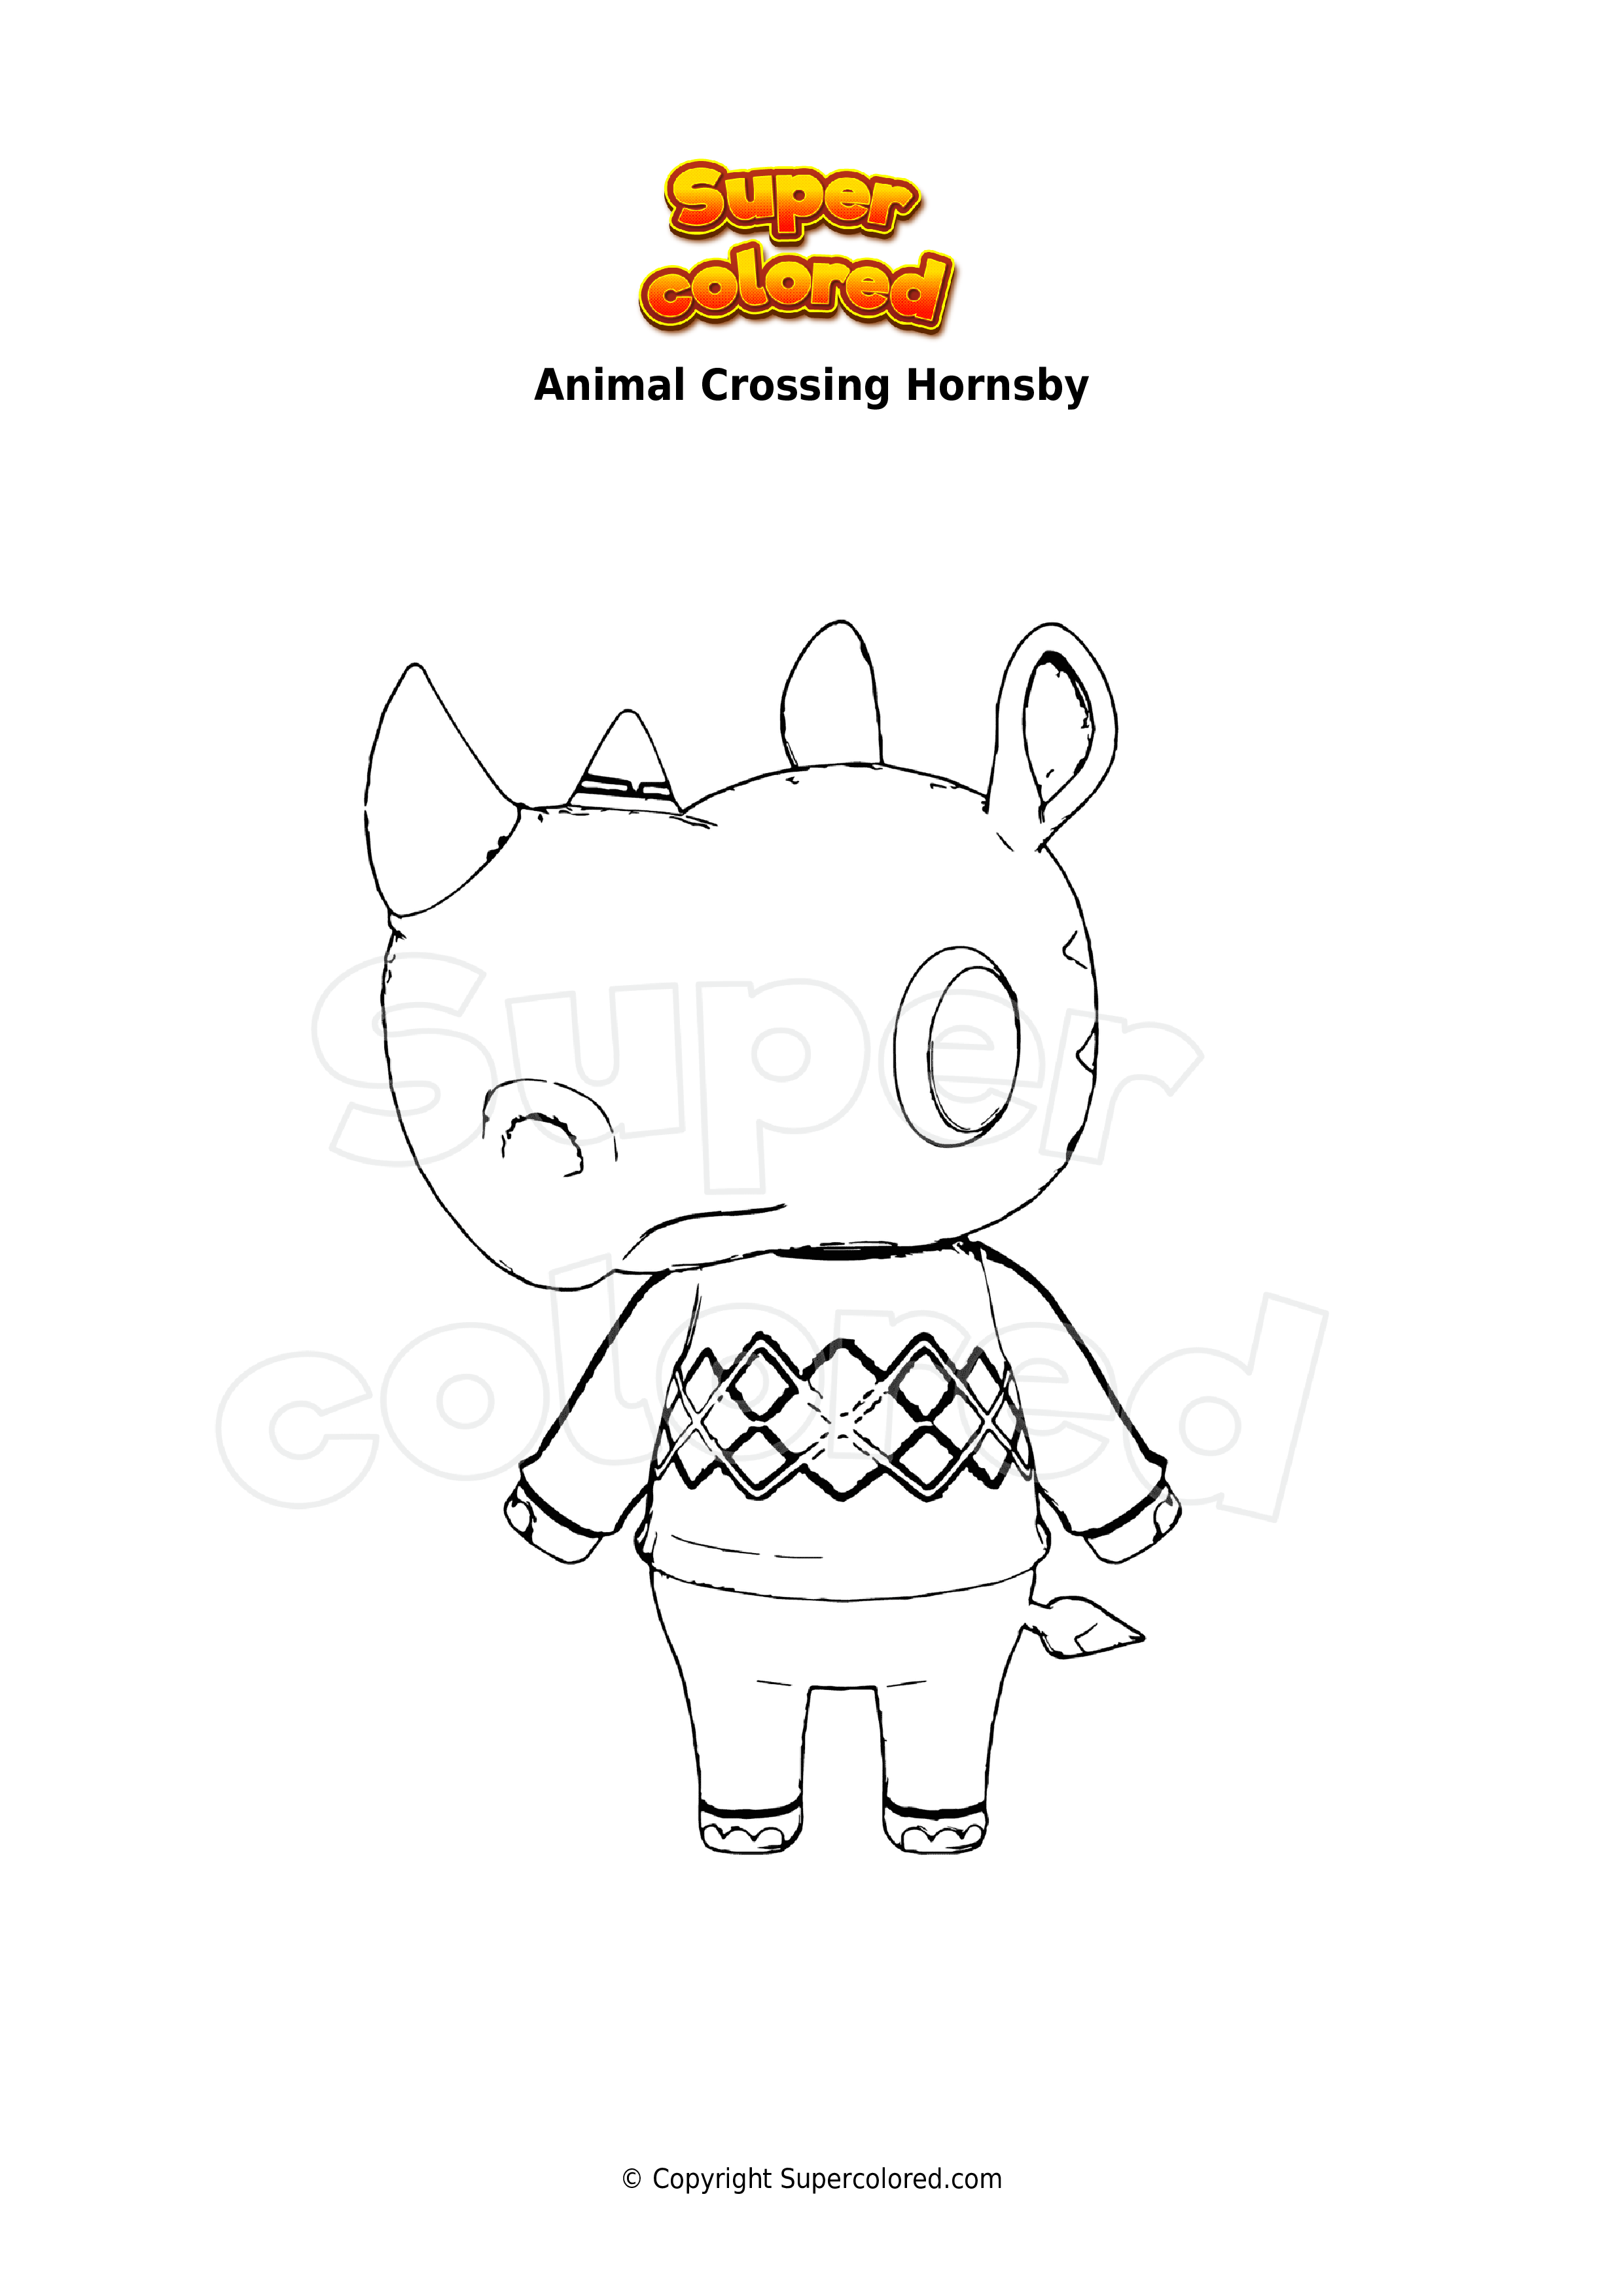 Coloring page Animal Crossing Hornsby   Supercolored.com